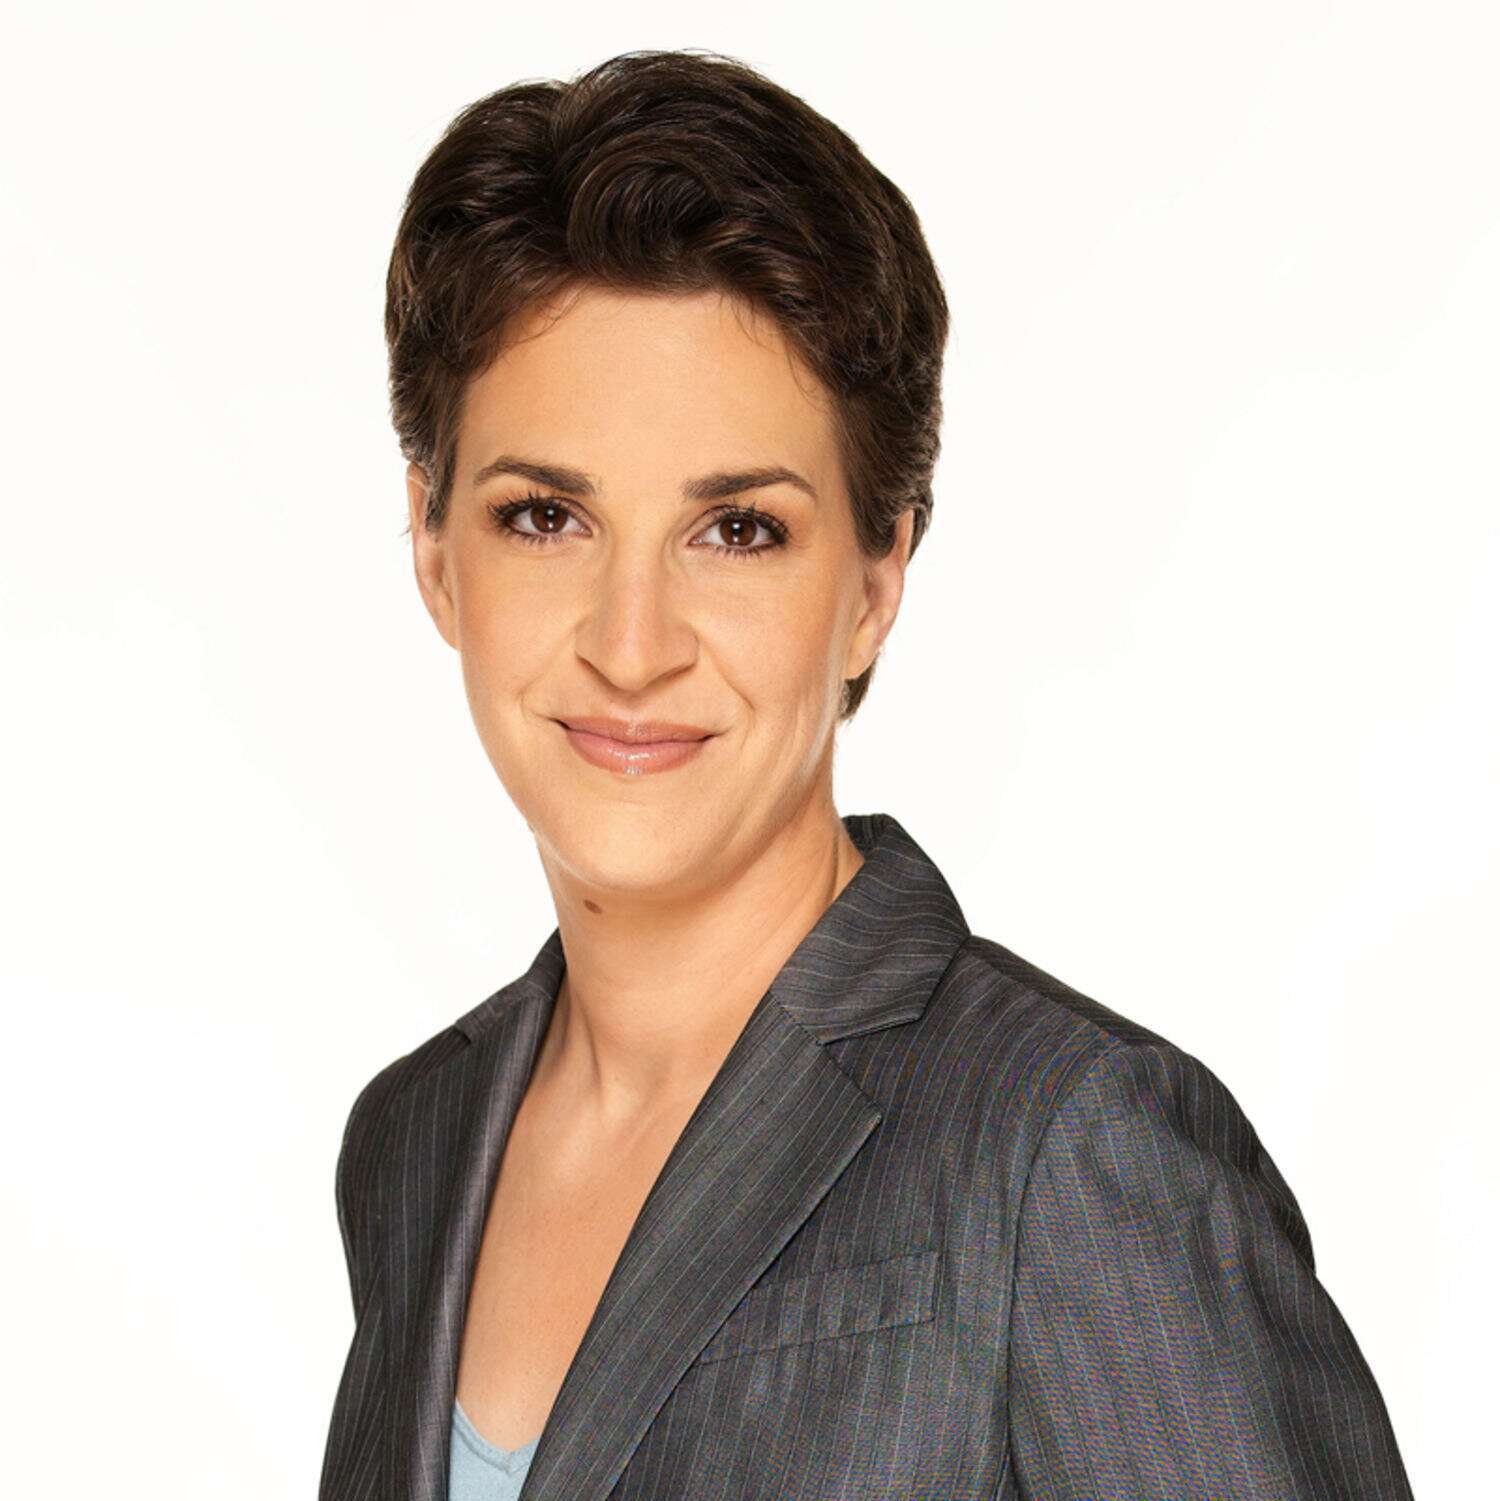 Rachel maddow television host and journalist